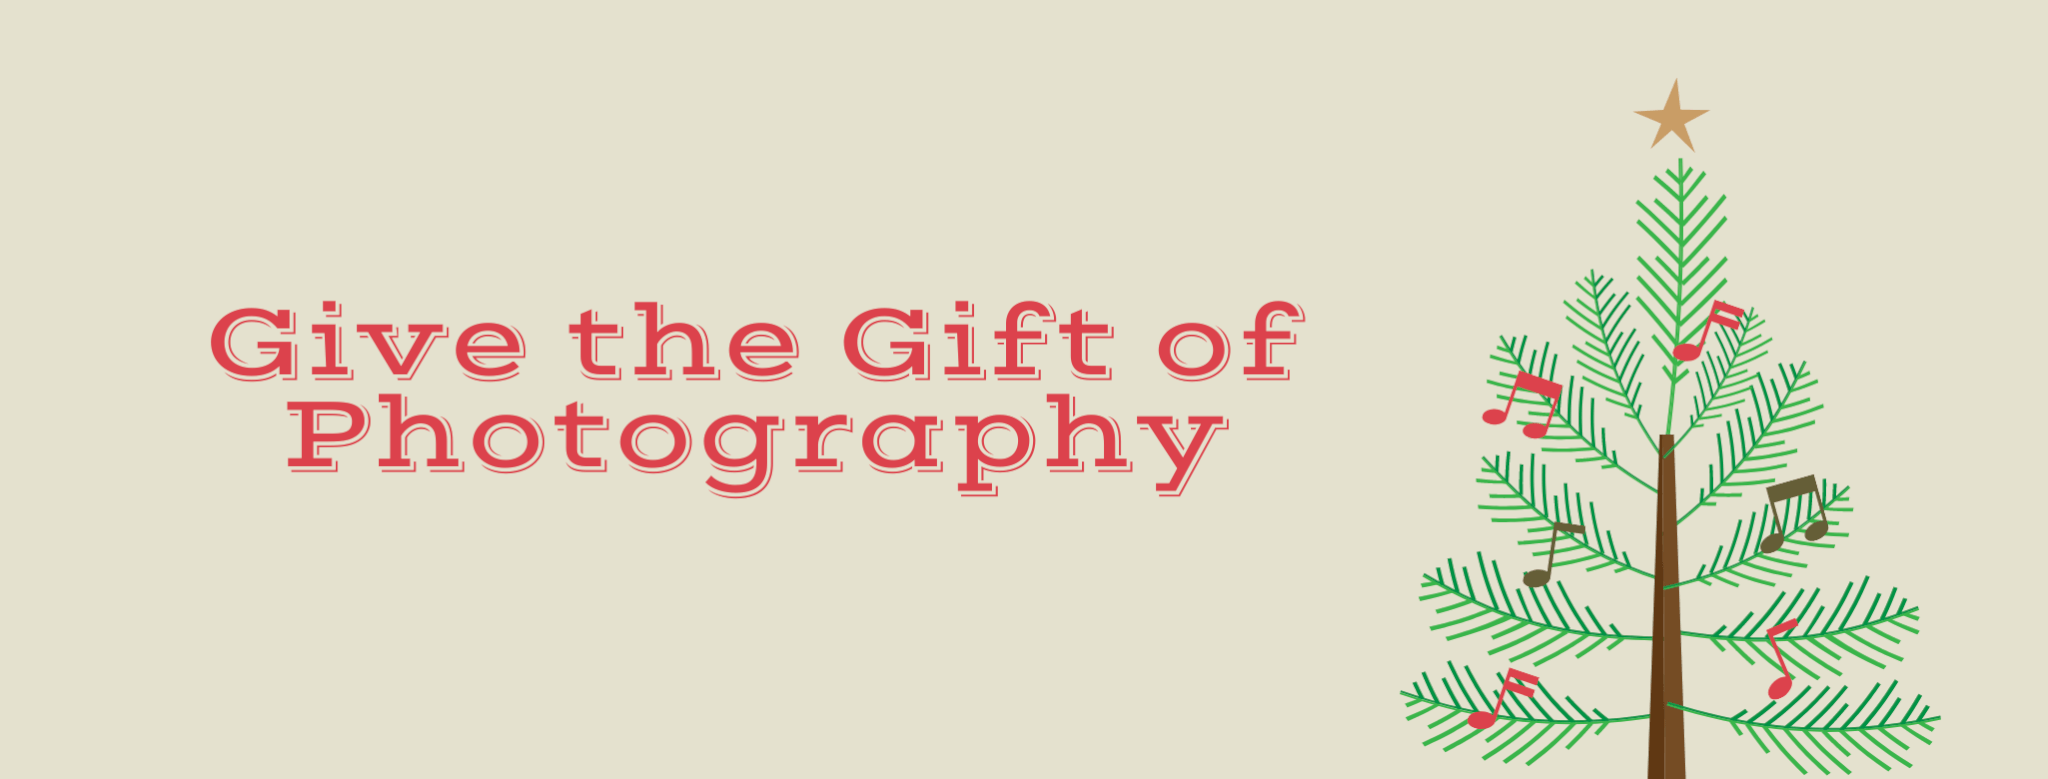 Give the Gift of Photography